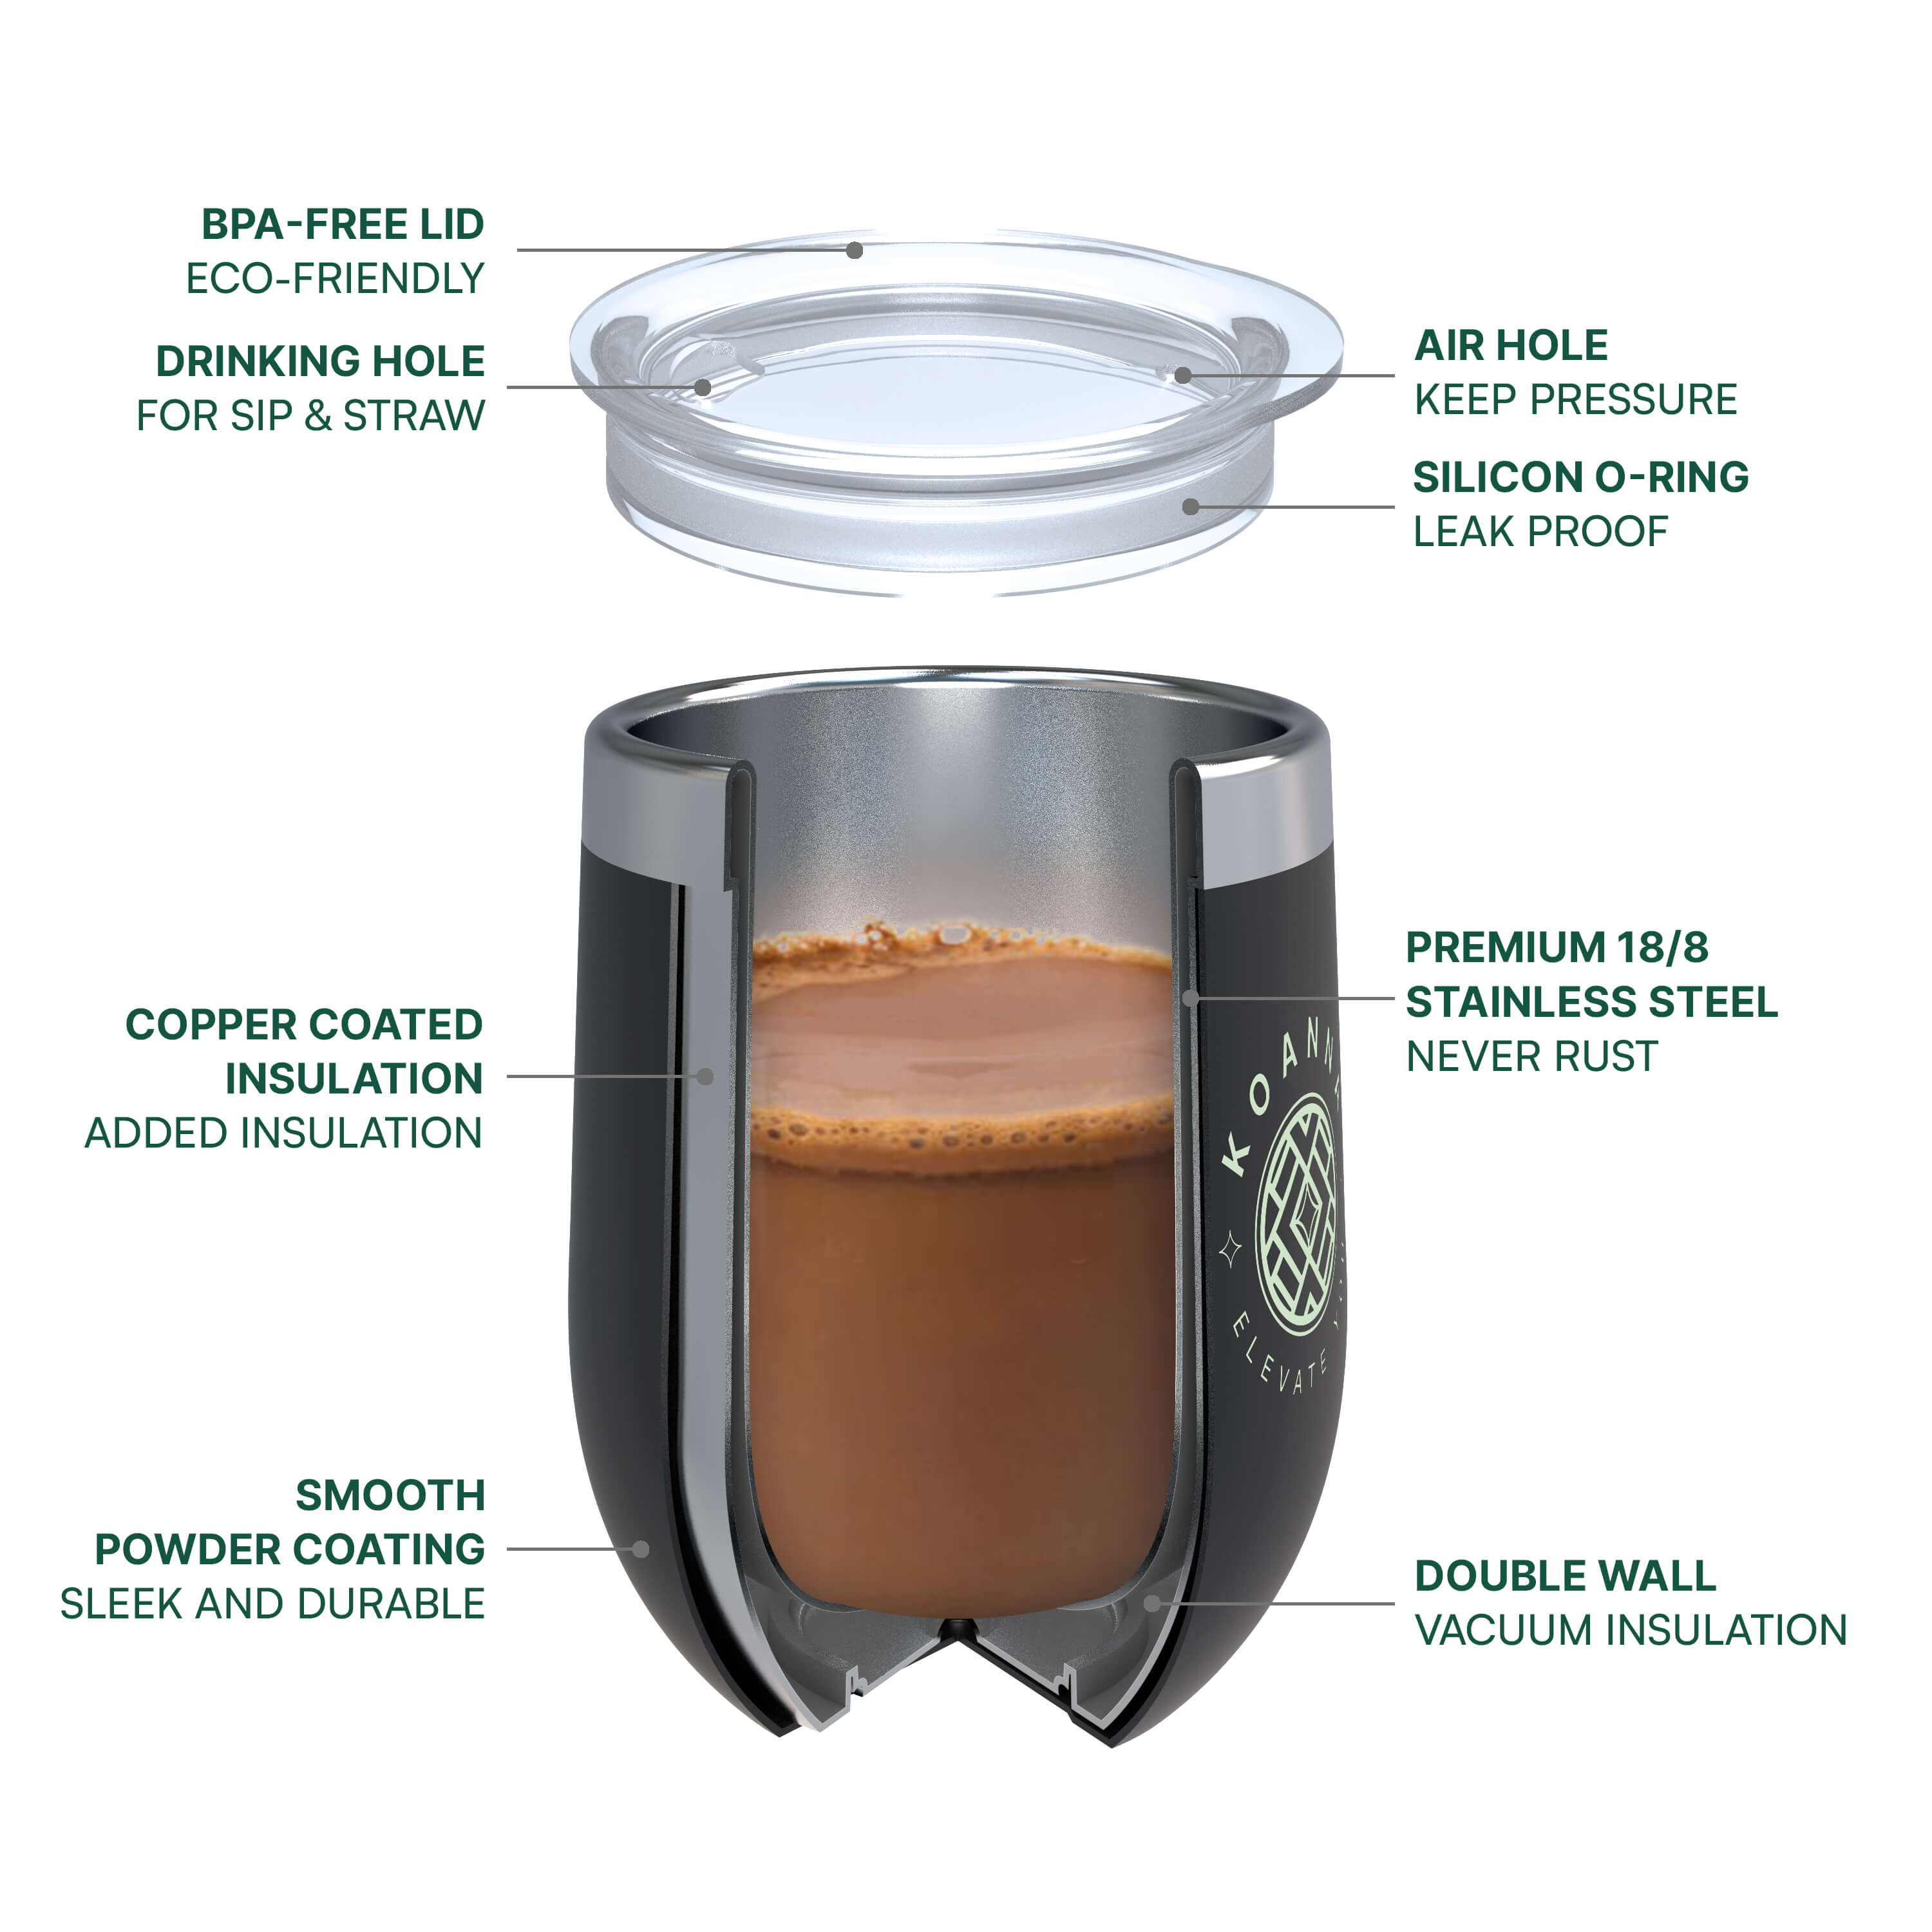 Infographic showing design and features of the Elevate thermal cup